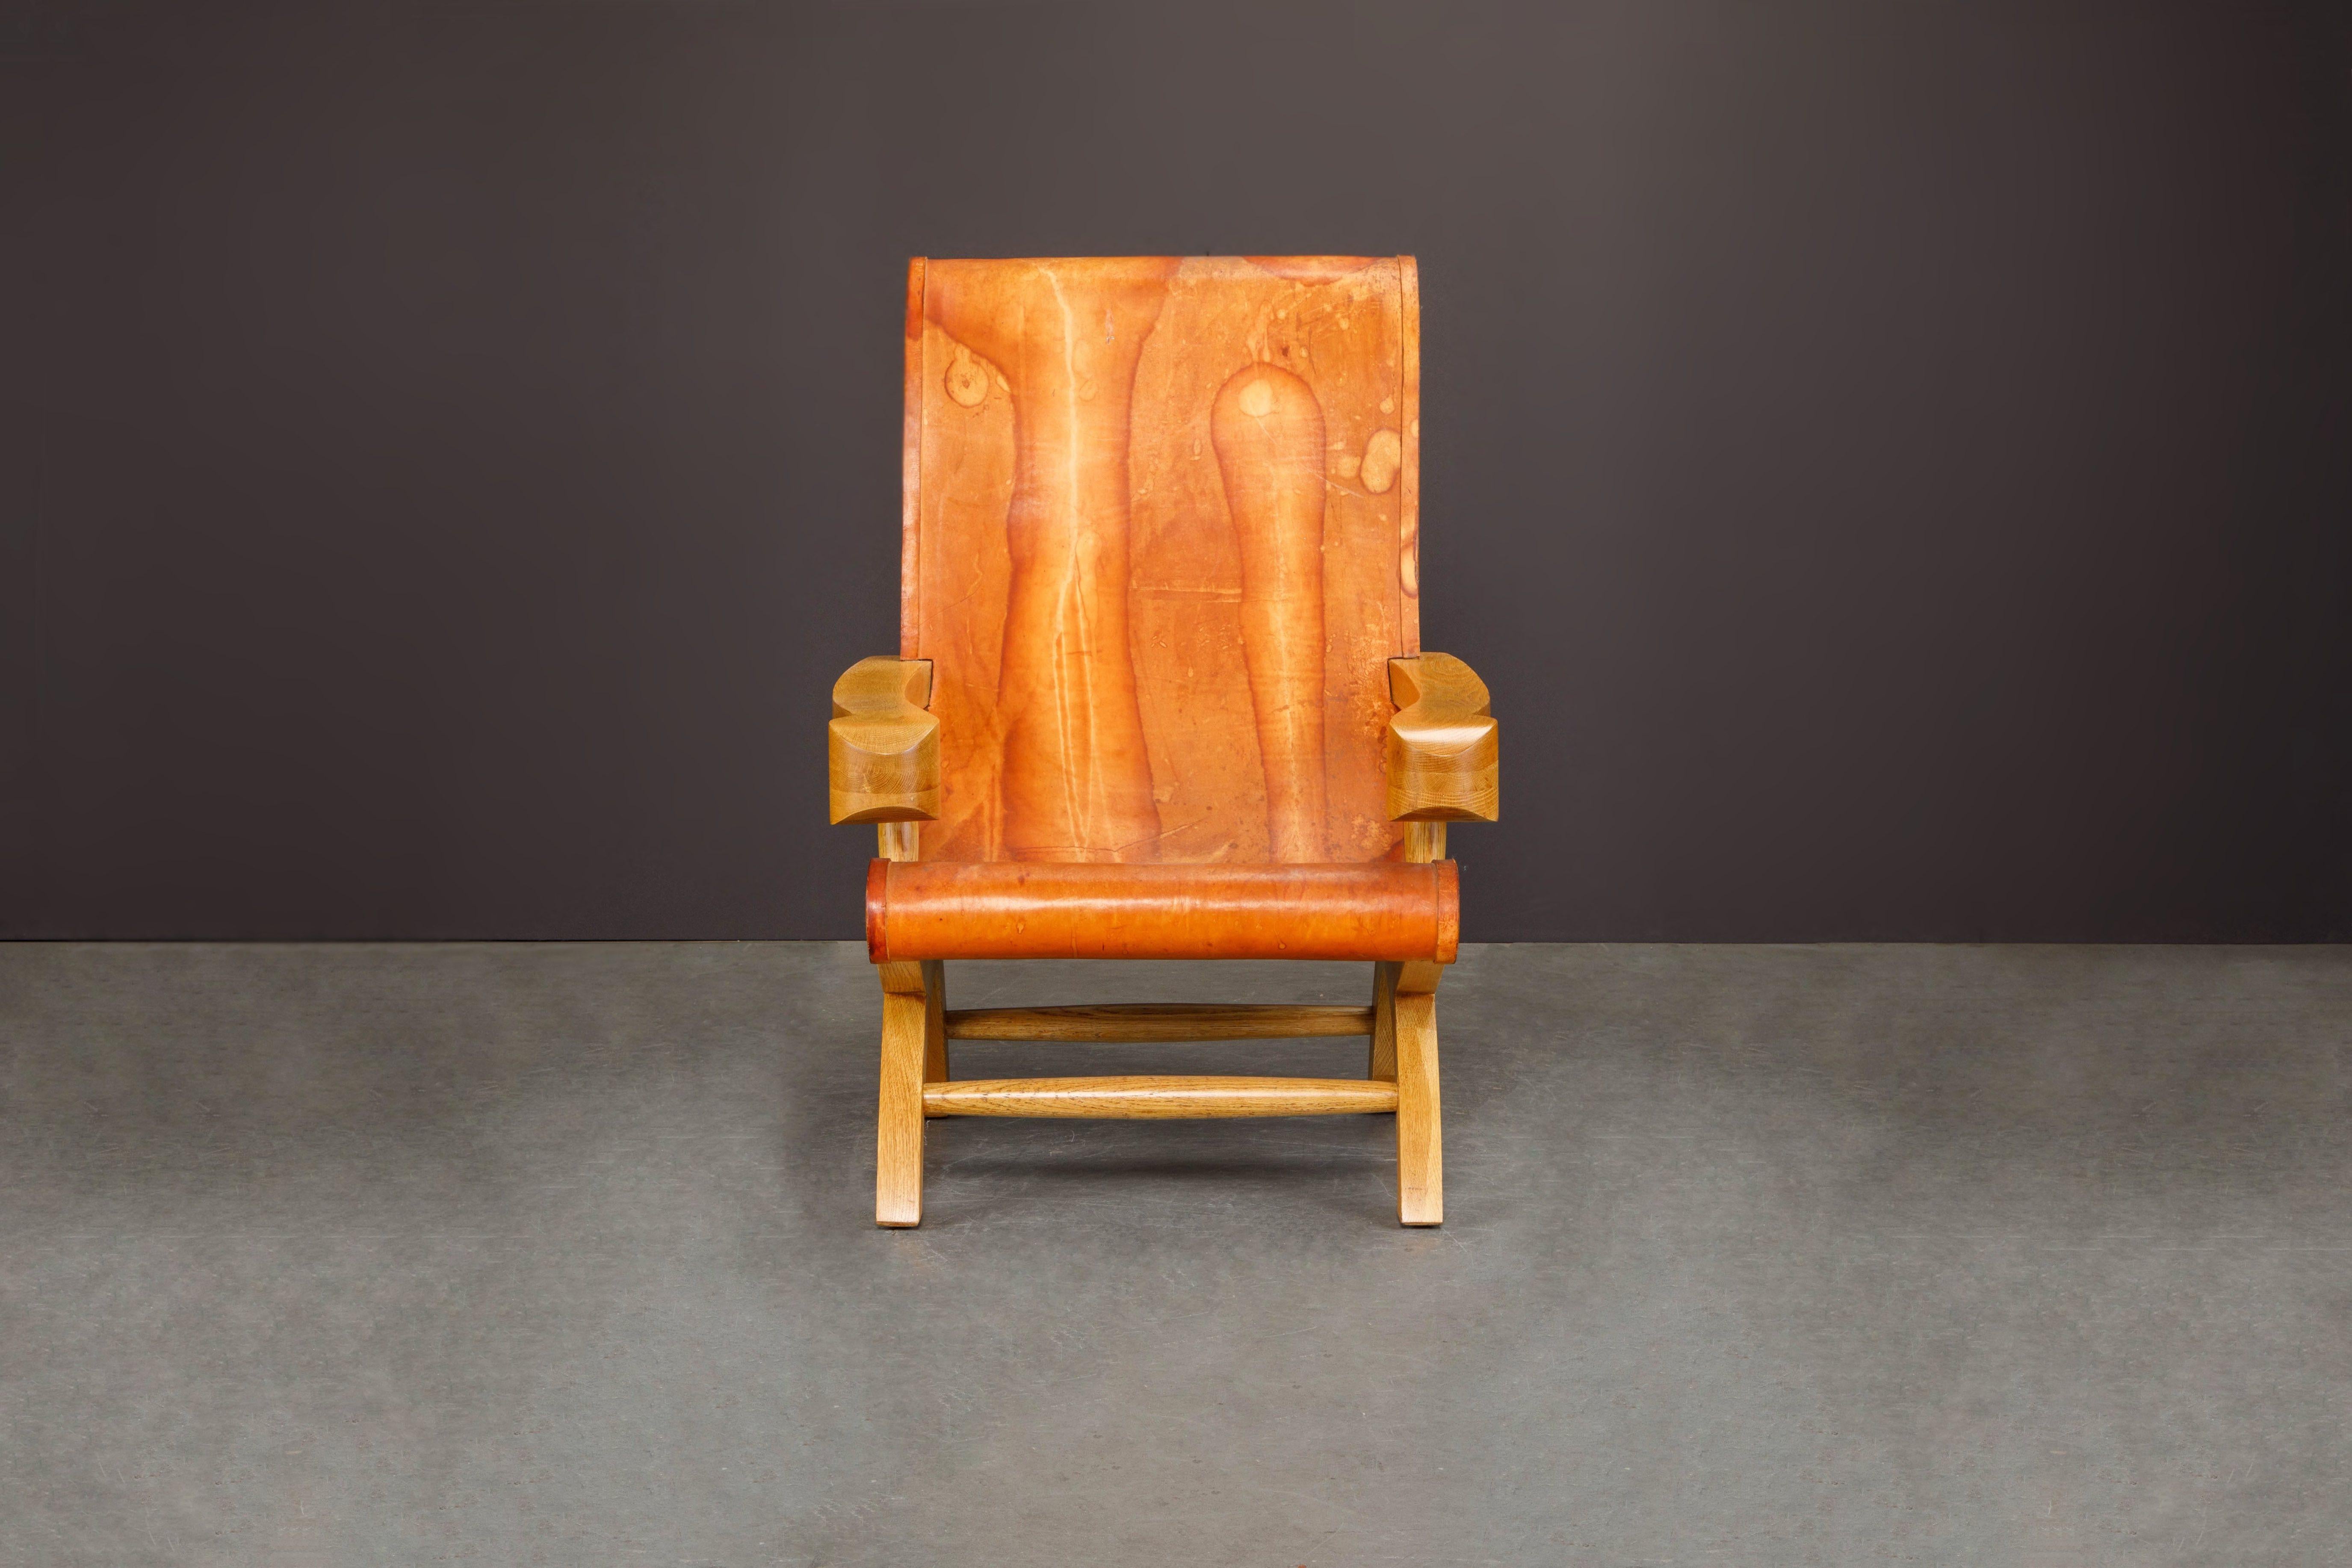 An incredible 'Butaque' armchair attributed to Clara Porset in gorgeous patinated leather and cypress wood, designed in 1947 Mexico.

*Note, the 2 additional chairs in the last few images have sold and are no longer available. 

In the mid-1930s